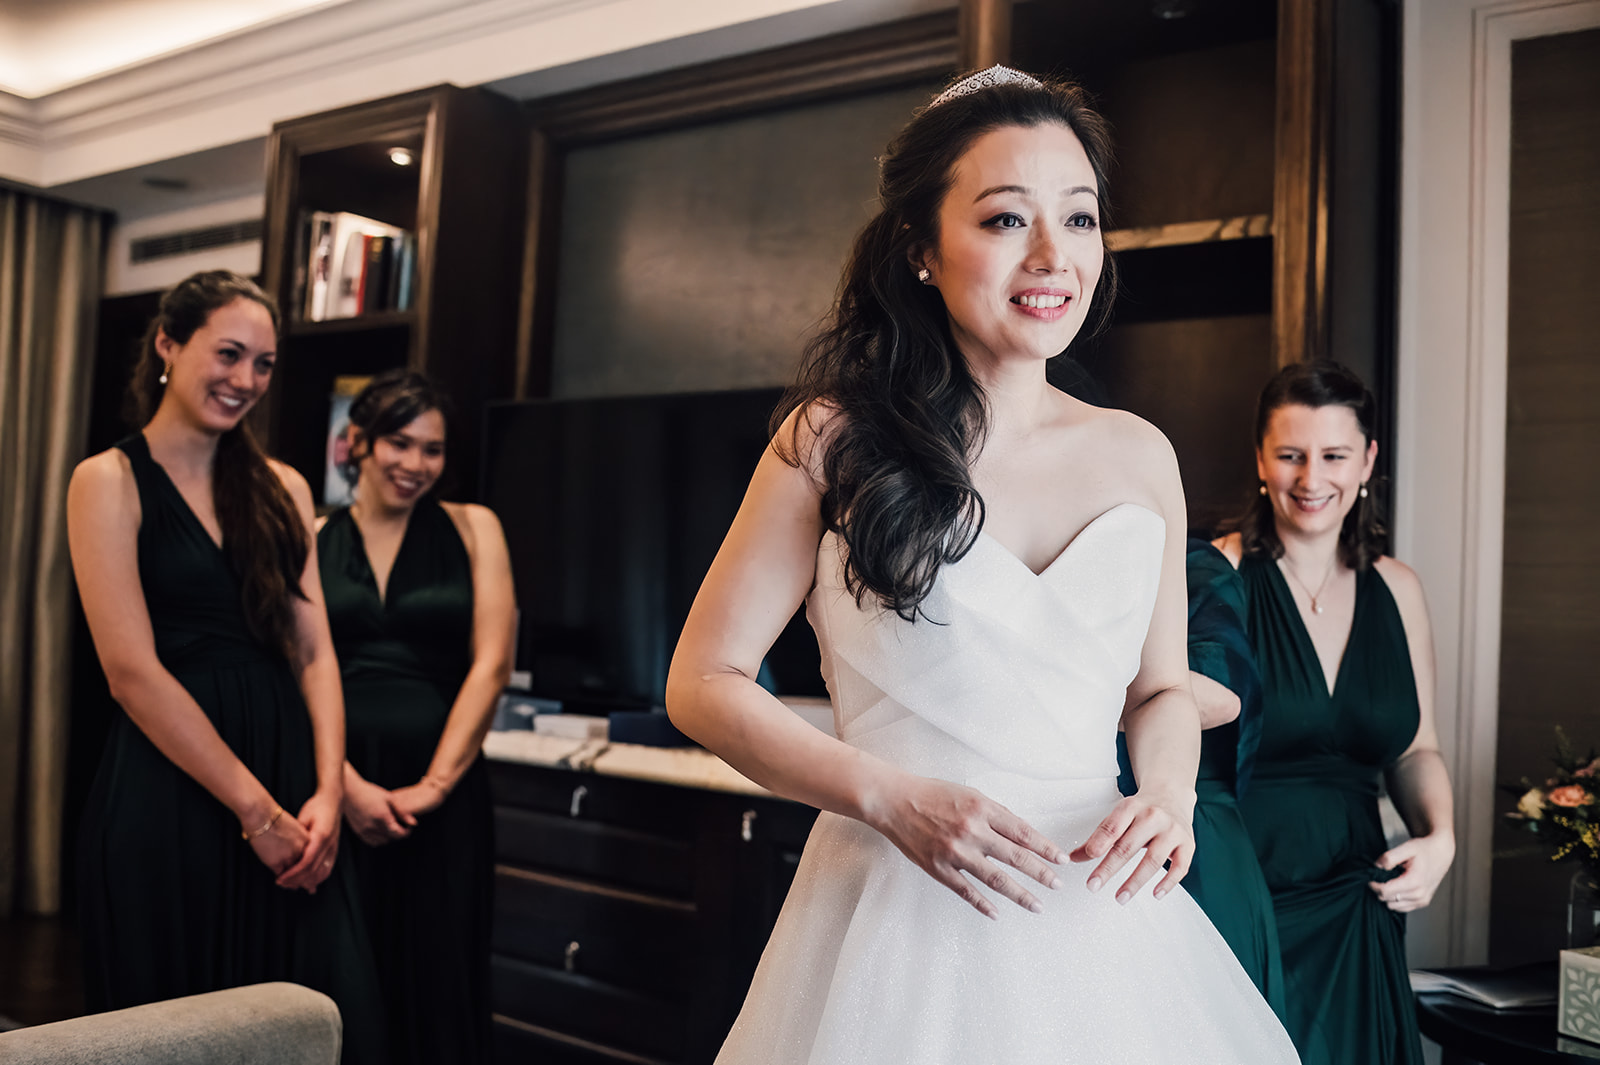 Bride and her bridesmaids during the preparations at Corinthia hotel, London.